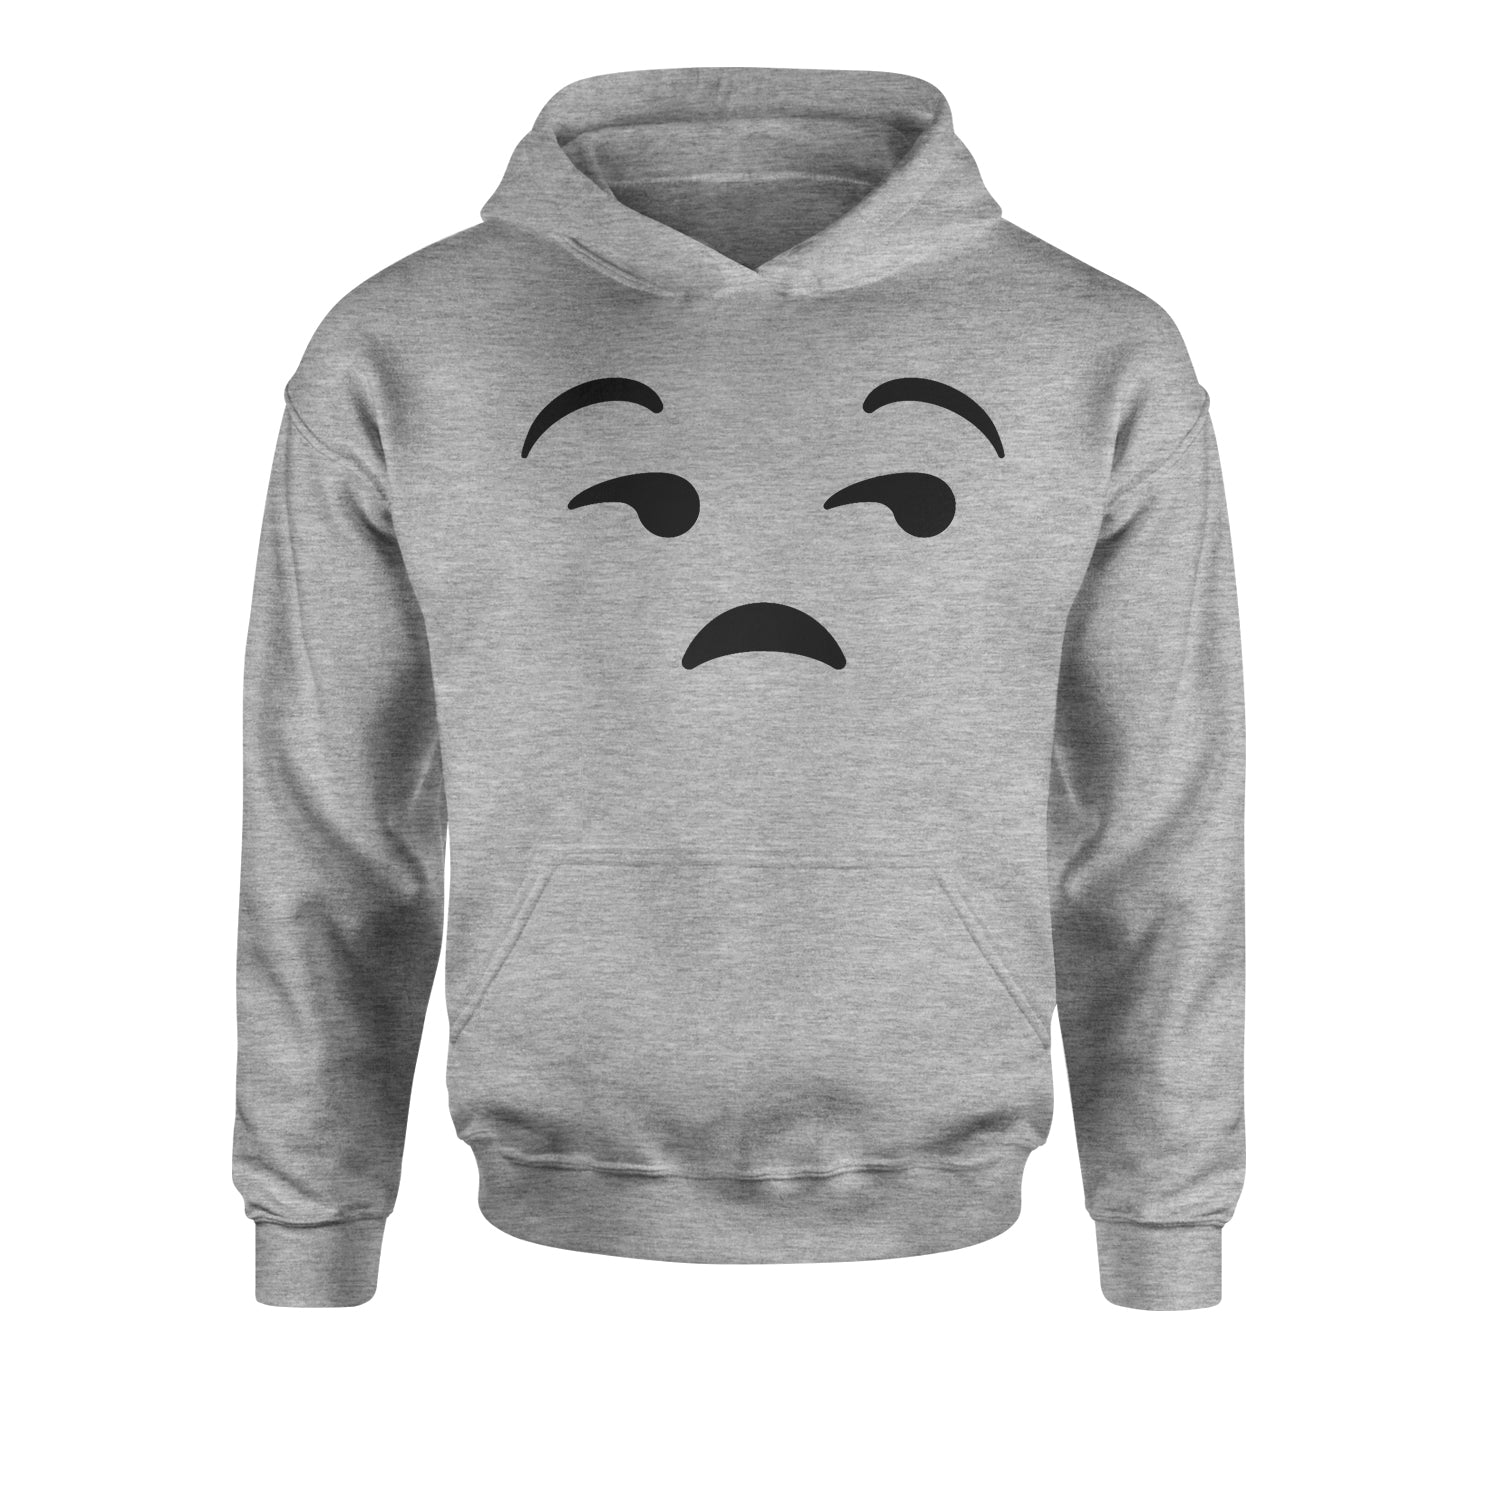 Emoticon Whatever Smile Face Youth-Sized Hoodie cosplay, costume, dress, emoji, emote, face, halloween, smiley, up, yellow, youth-sized by Expression Tees